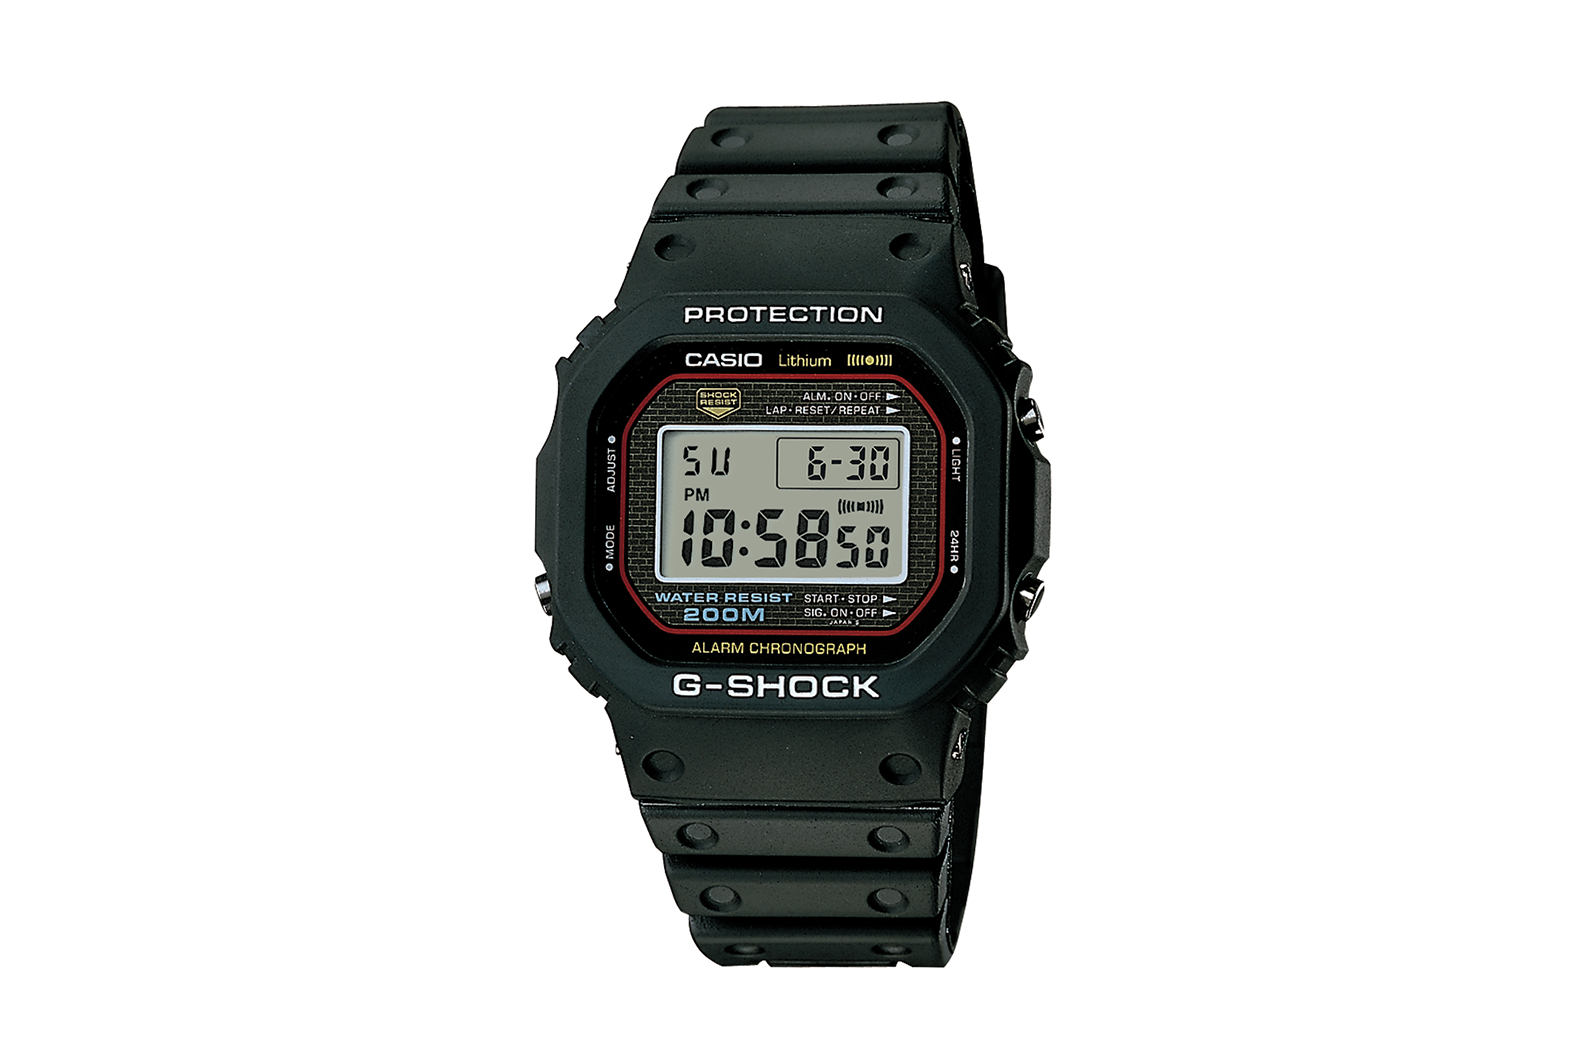 The first G-SHOCK was registered as a technological heritage of the future 2019 by the National Museum of Nature and Science.